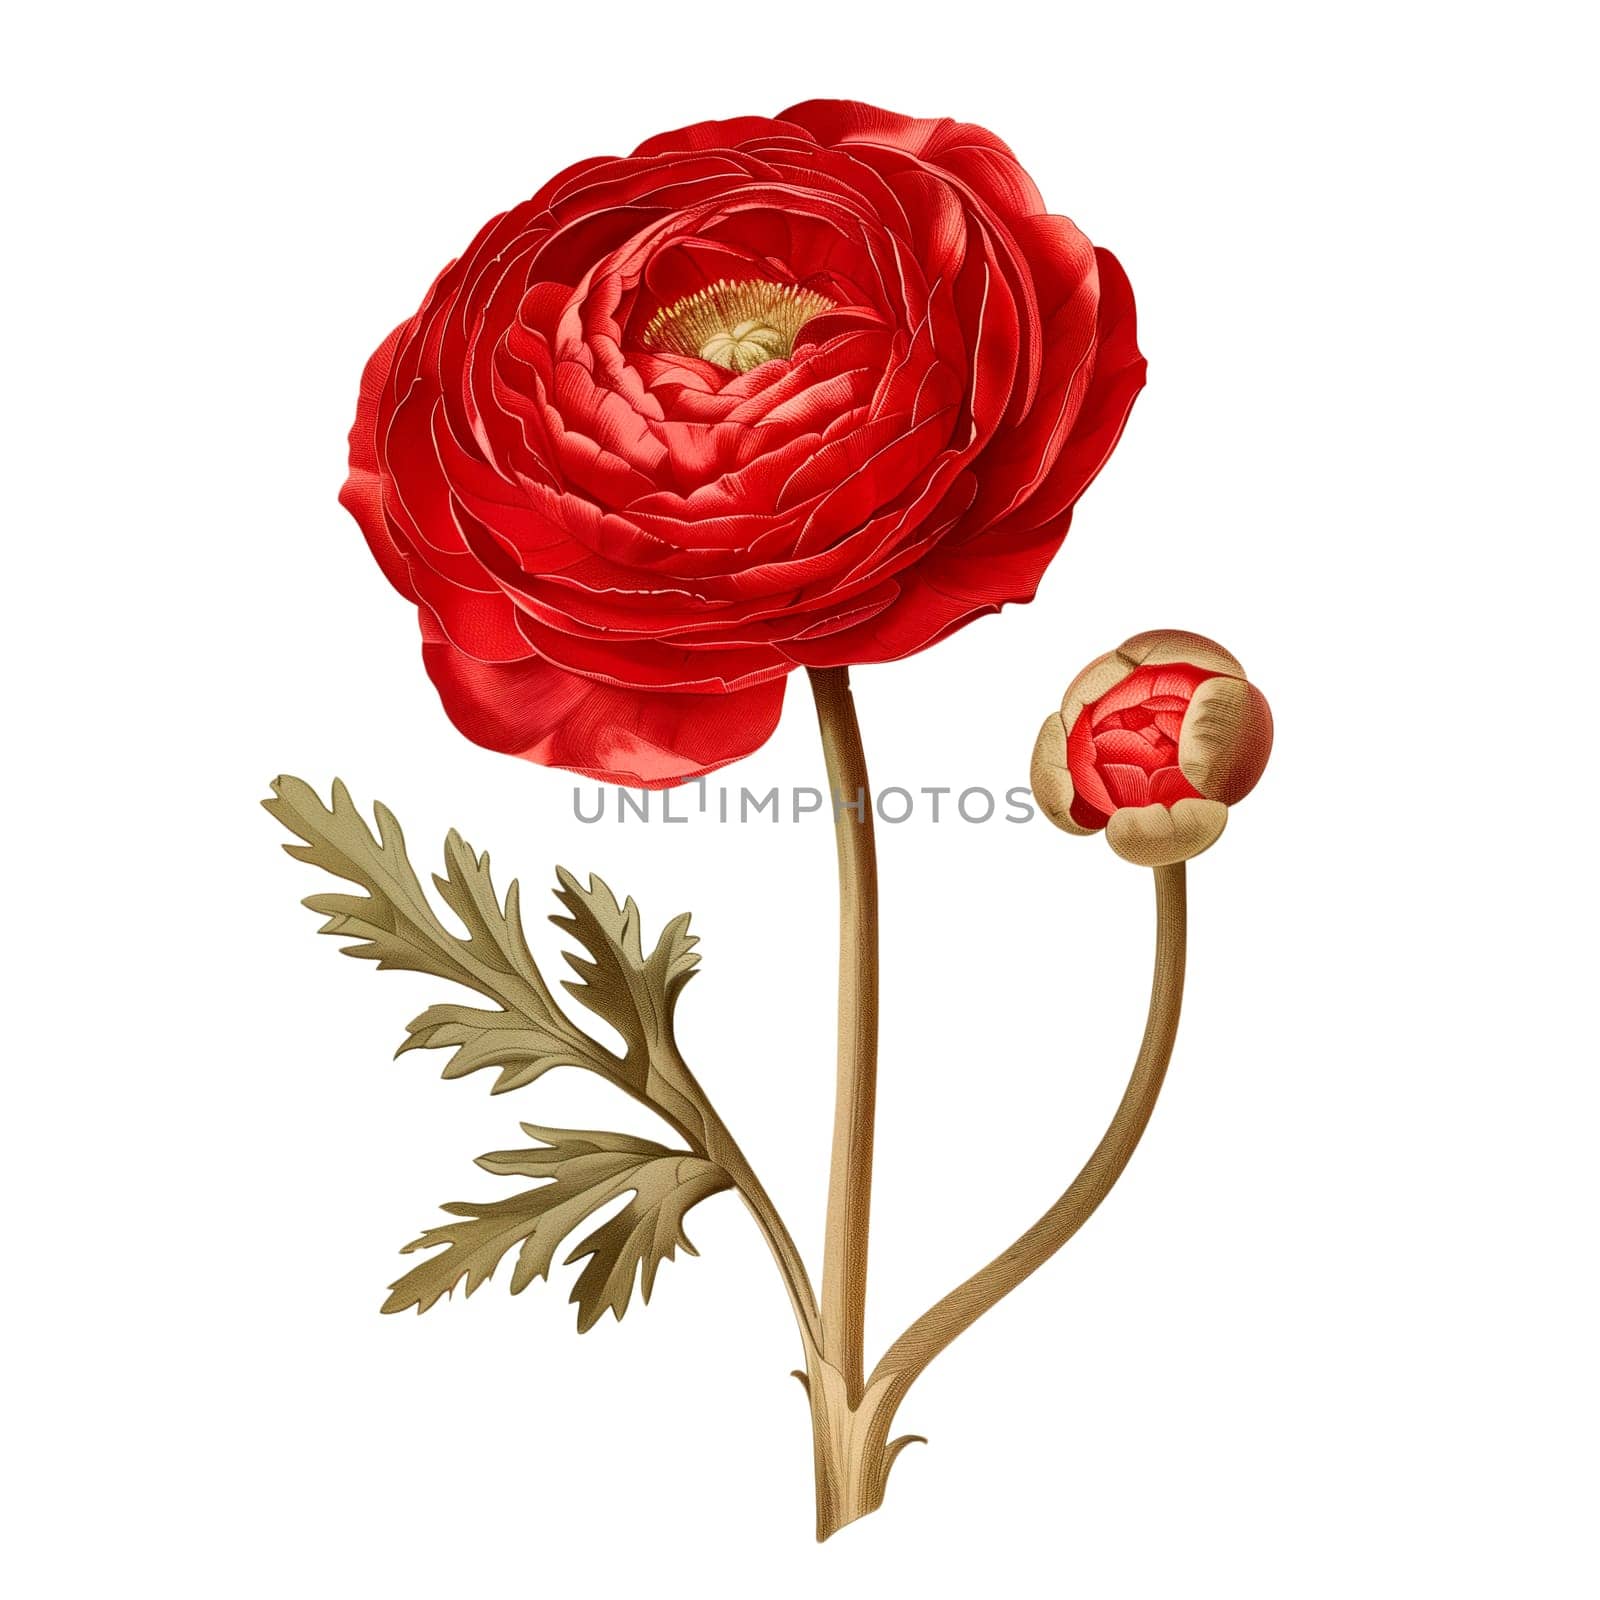 Isolated illustration of red ranunculus flower by Dustick